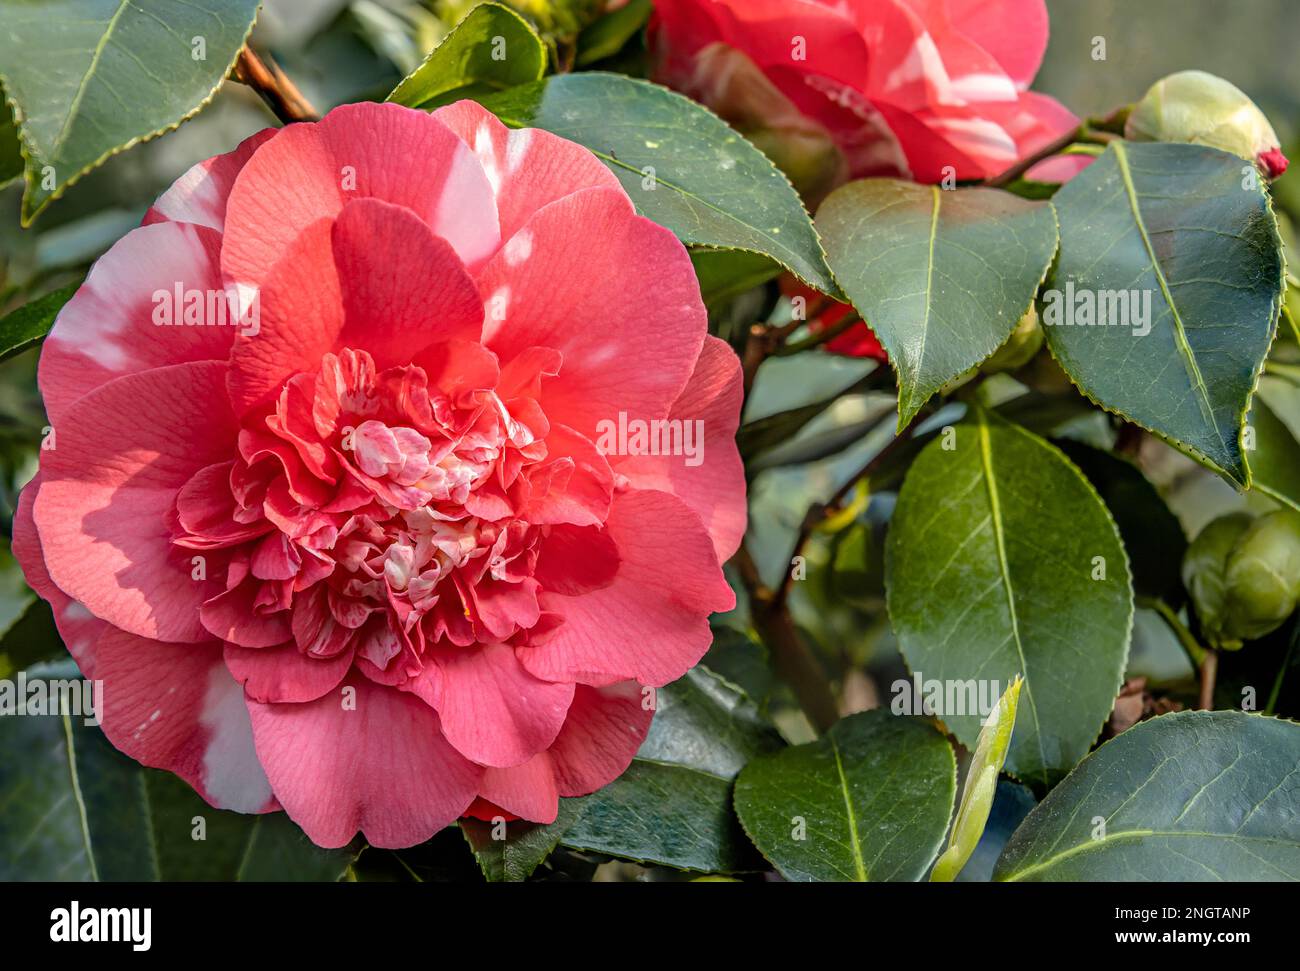 Closeup of pink and white Camellia Japonica 'Chandlers Elegans' flowers at Landschloss Zuschendorf, Saxony, Germany Stock Photo